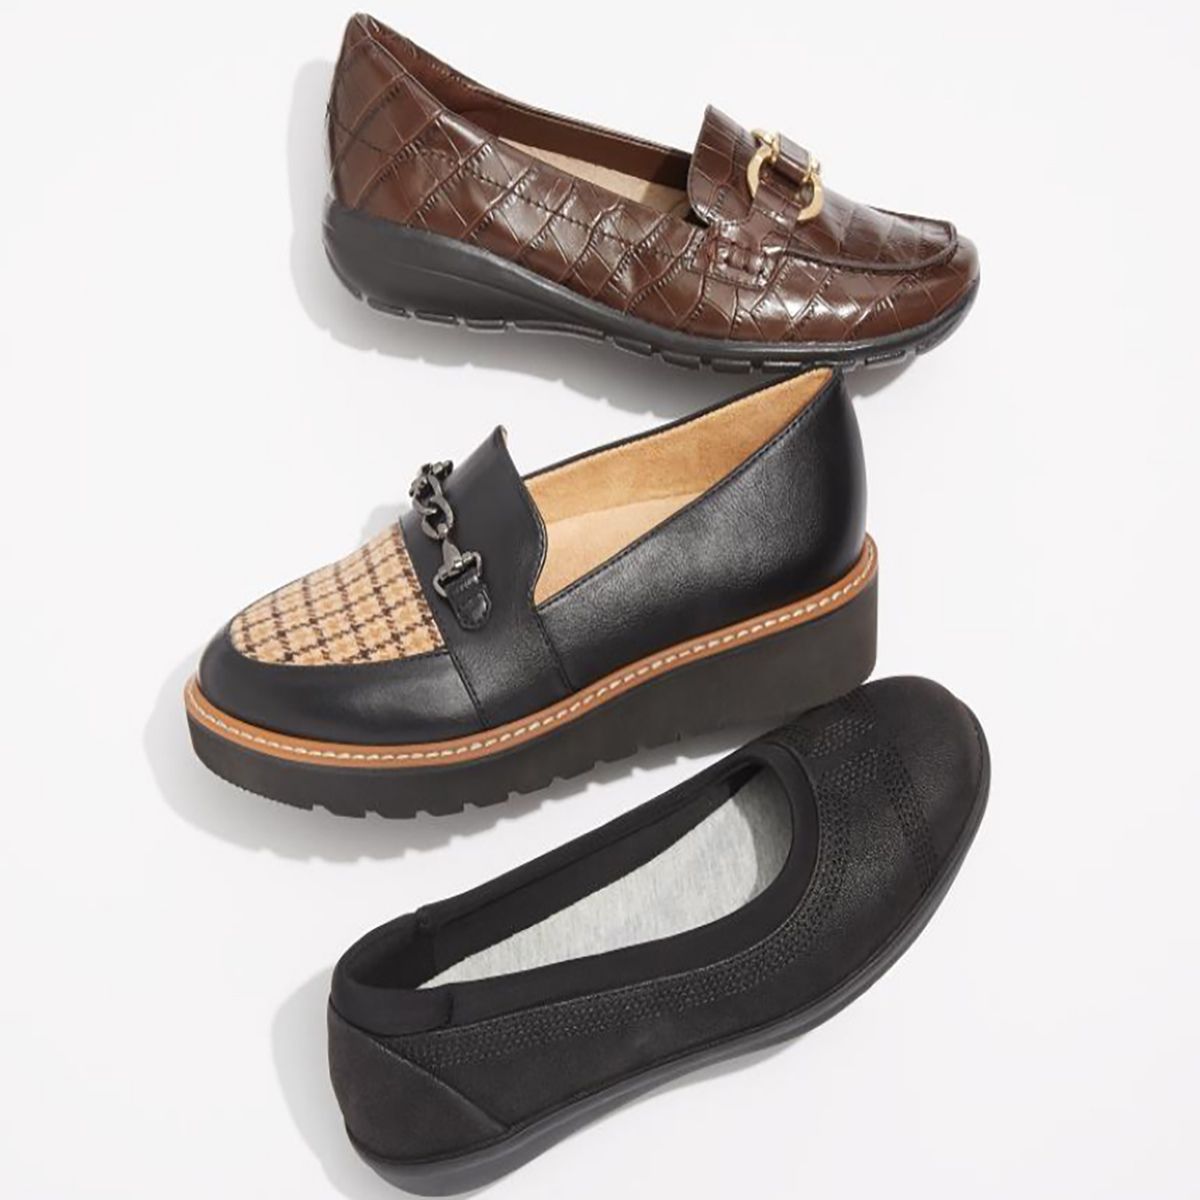 Suede Comfortable Shoes for Women - Macy's